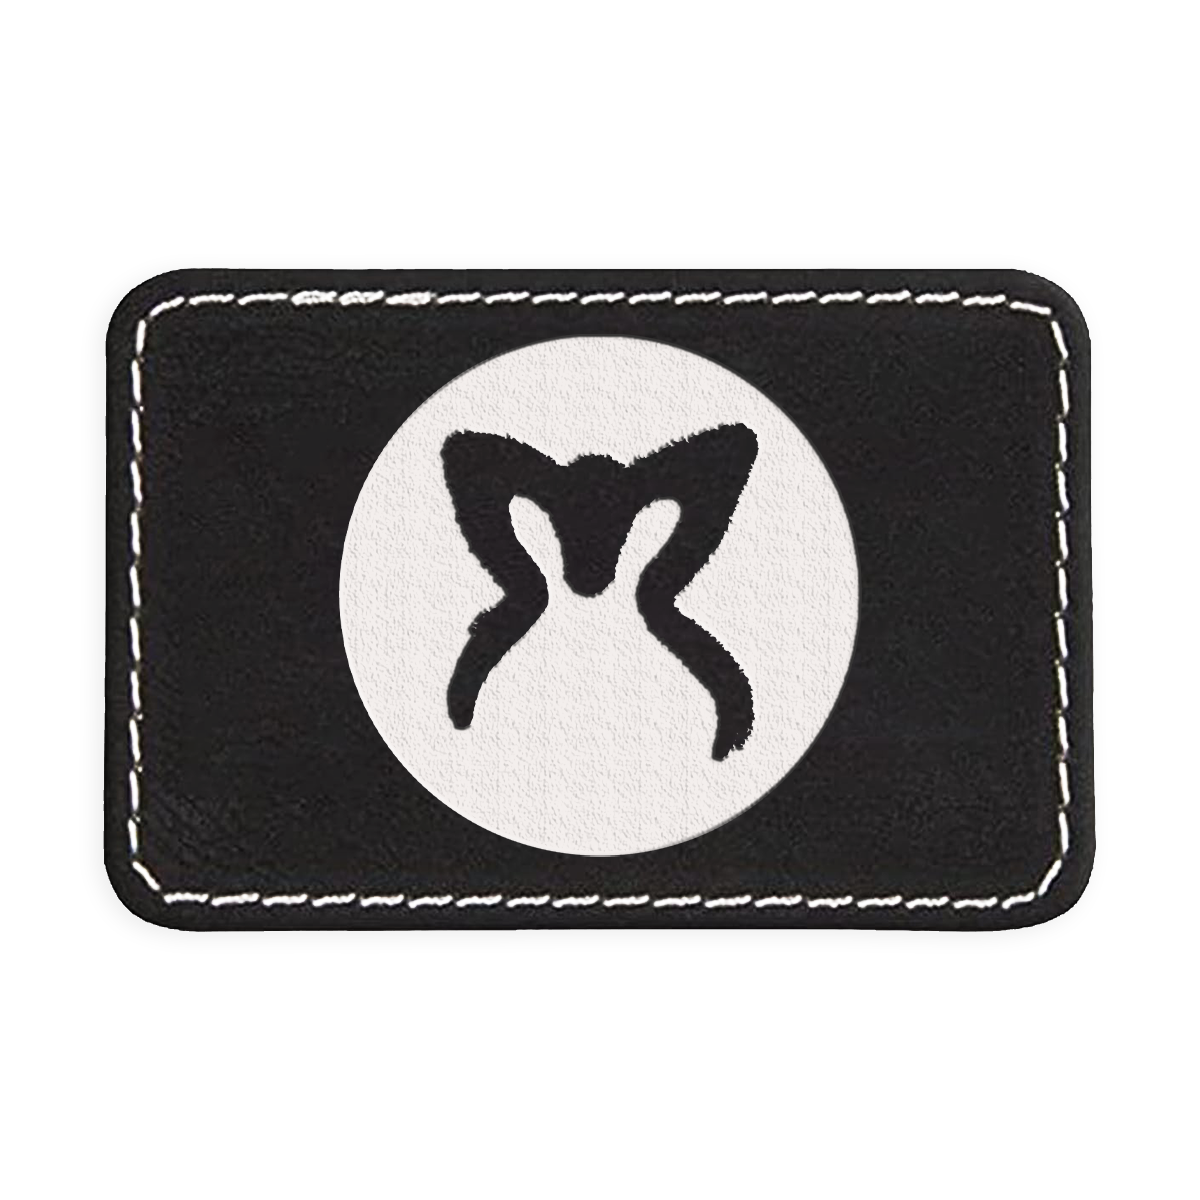 Motomami Engraved Patch